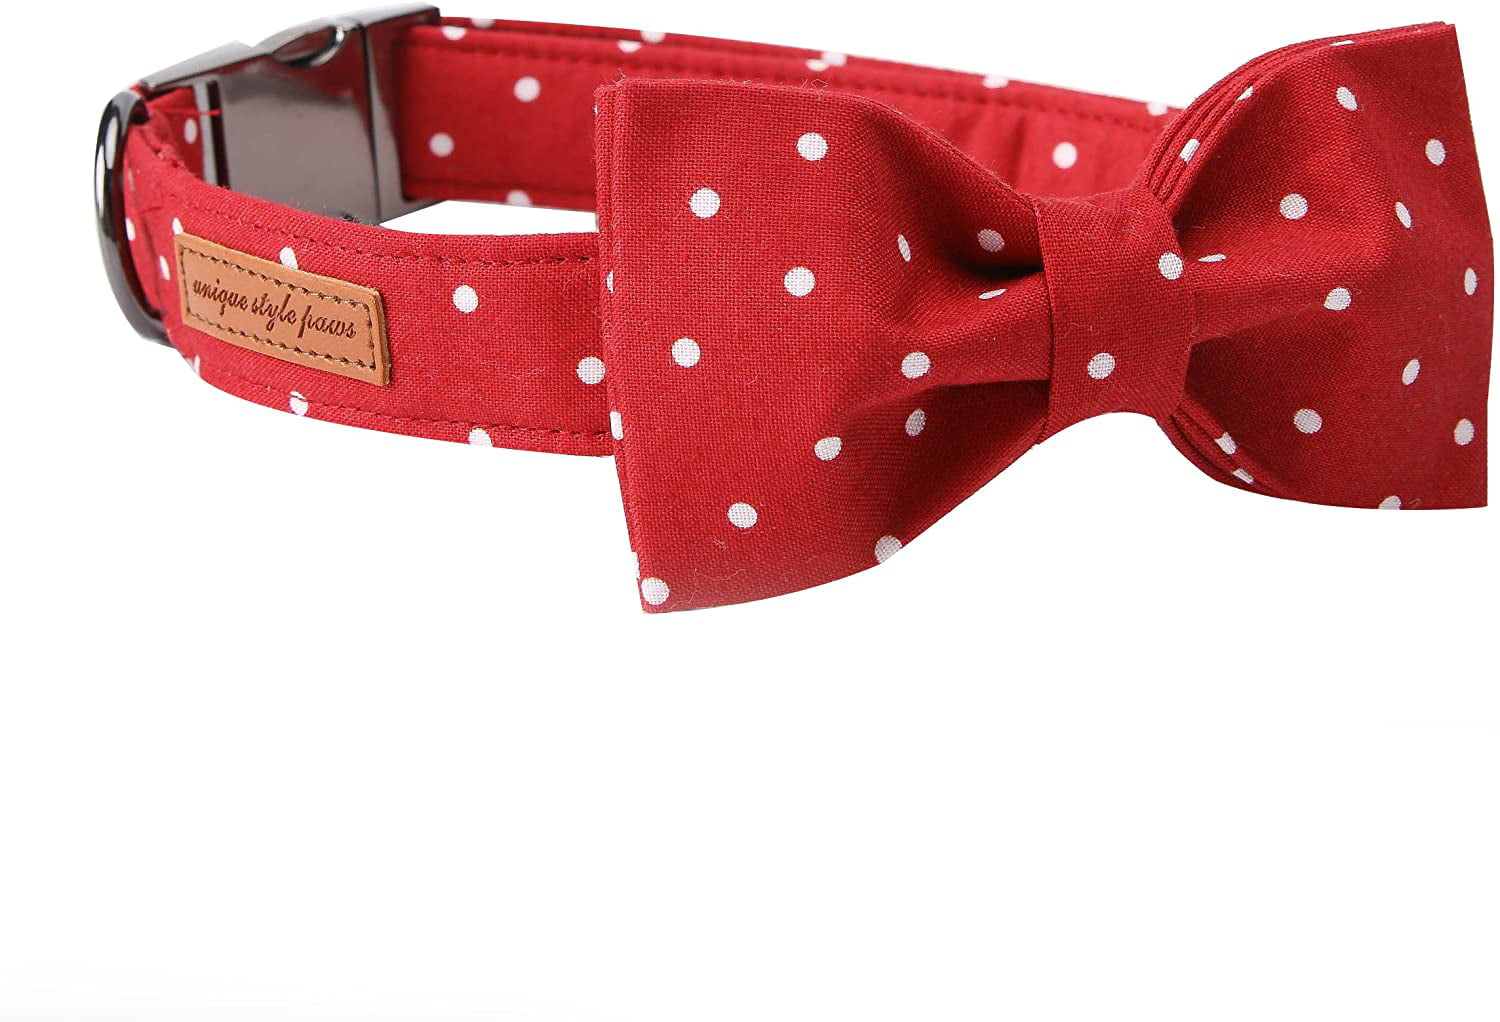 USP Pet Soft &Comfy Bowtie Dog Collar and Cat Collar Pet Gift for Dogs and Cats 6 Size and 7 Patterns 